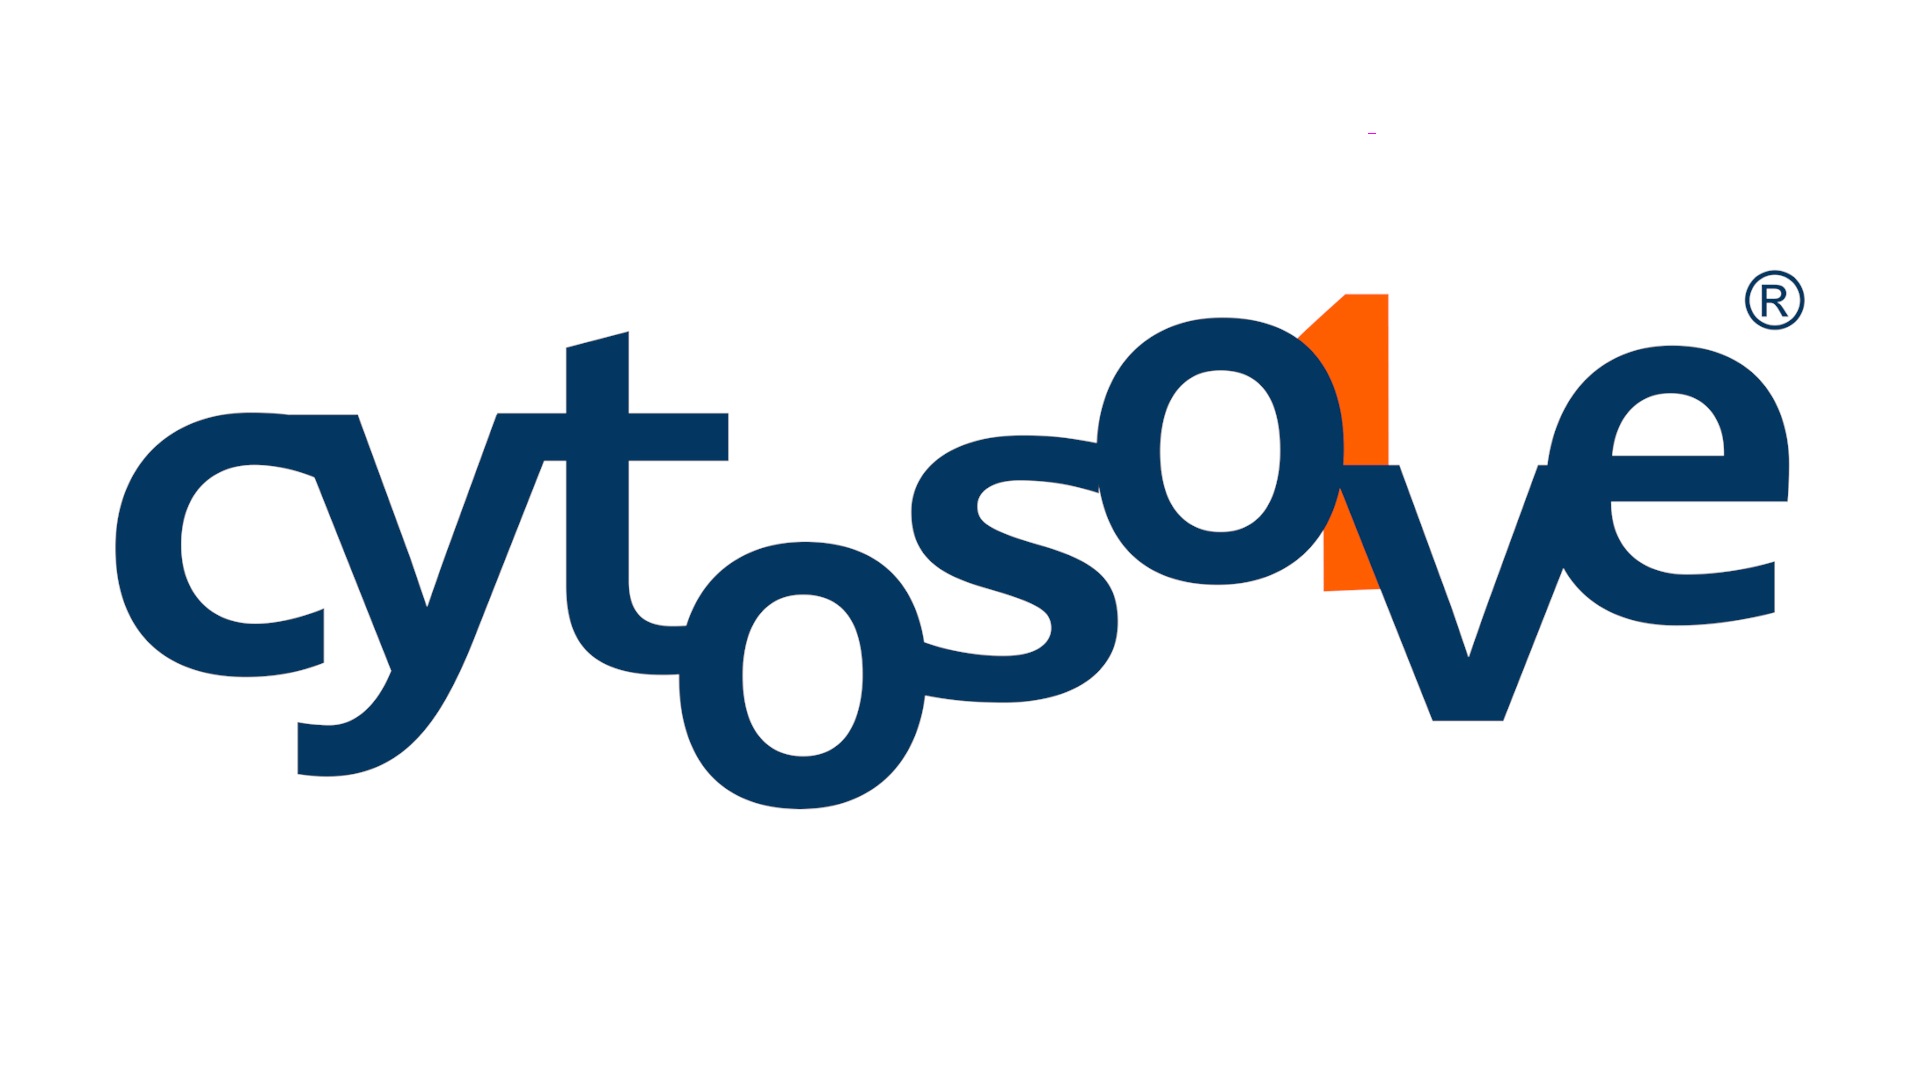 Welcome to CytoSolve